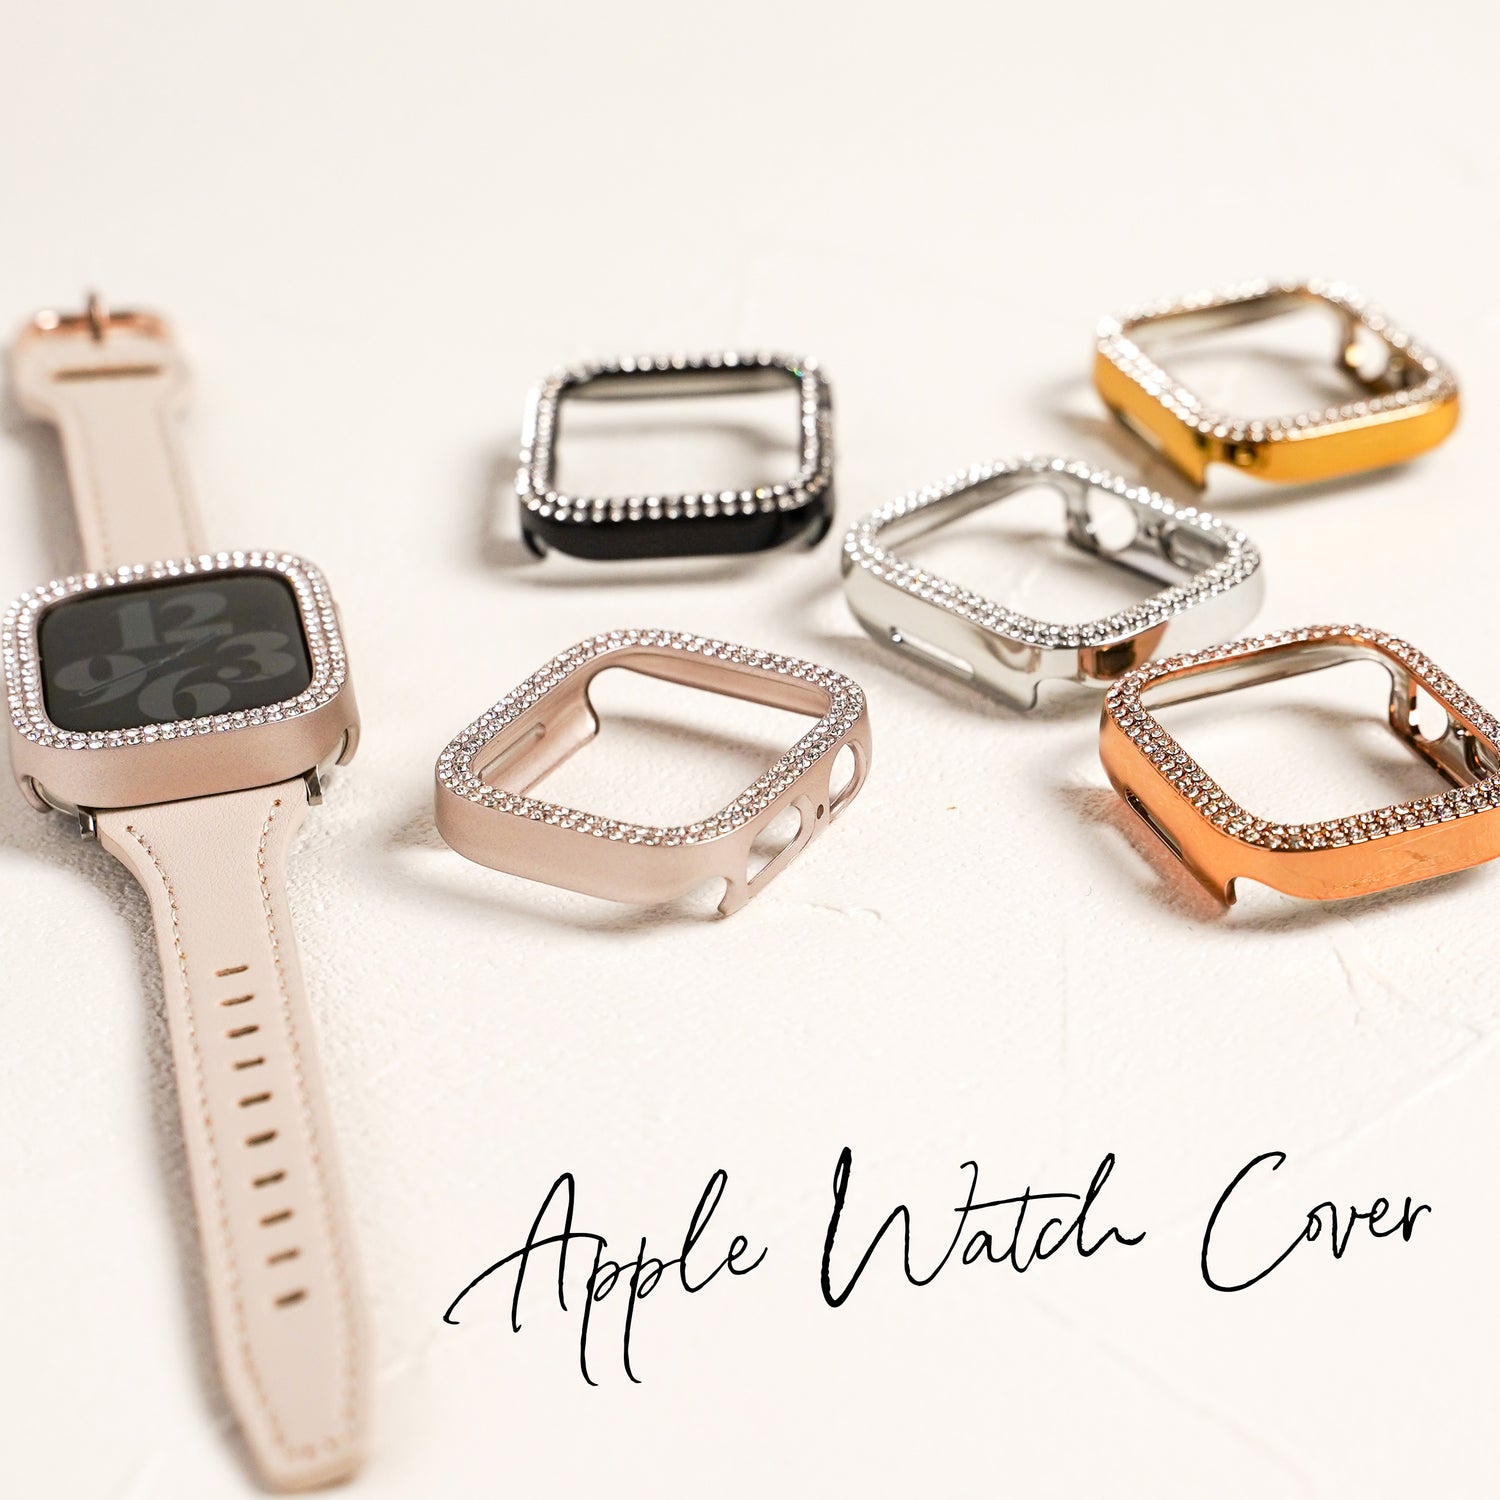 Apple Watch Cover Apple Watch Cover